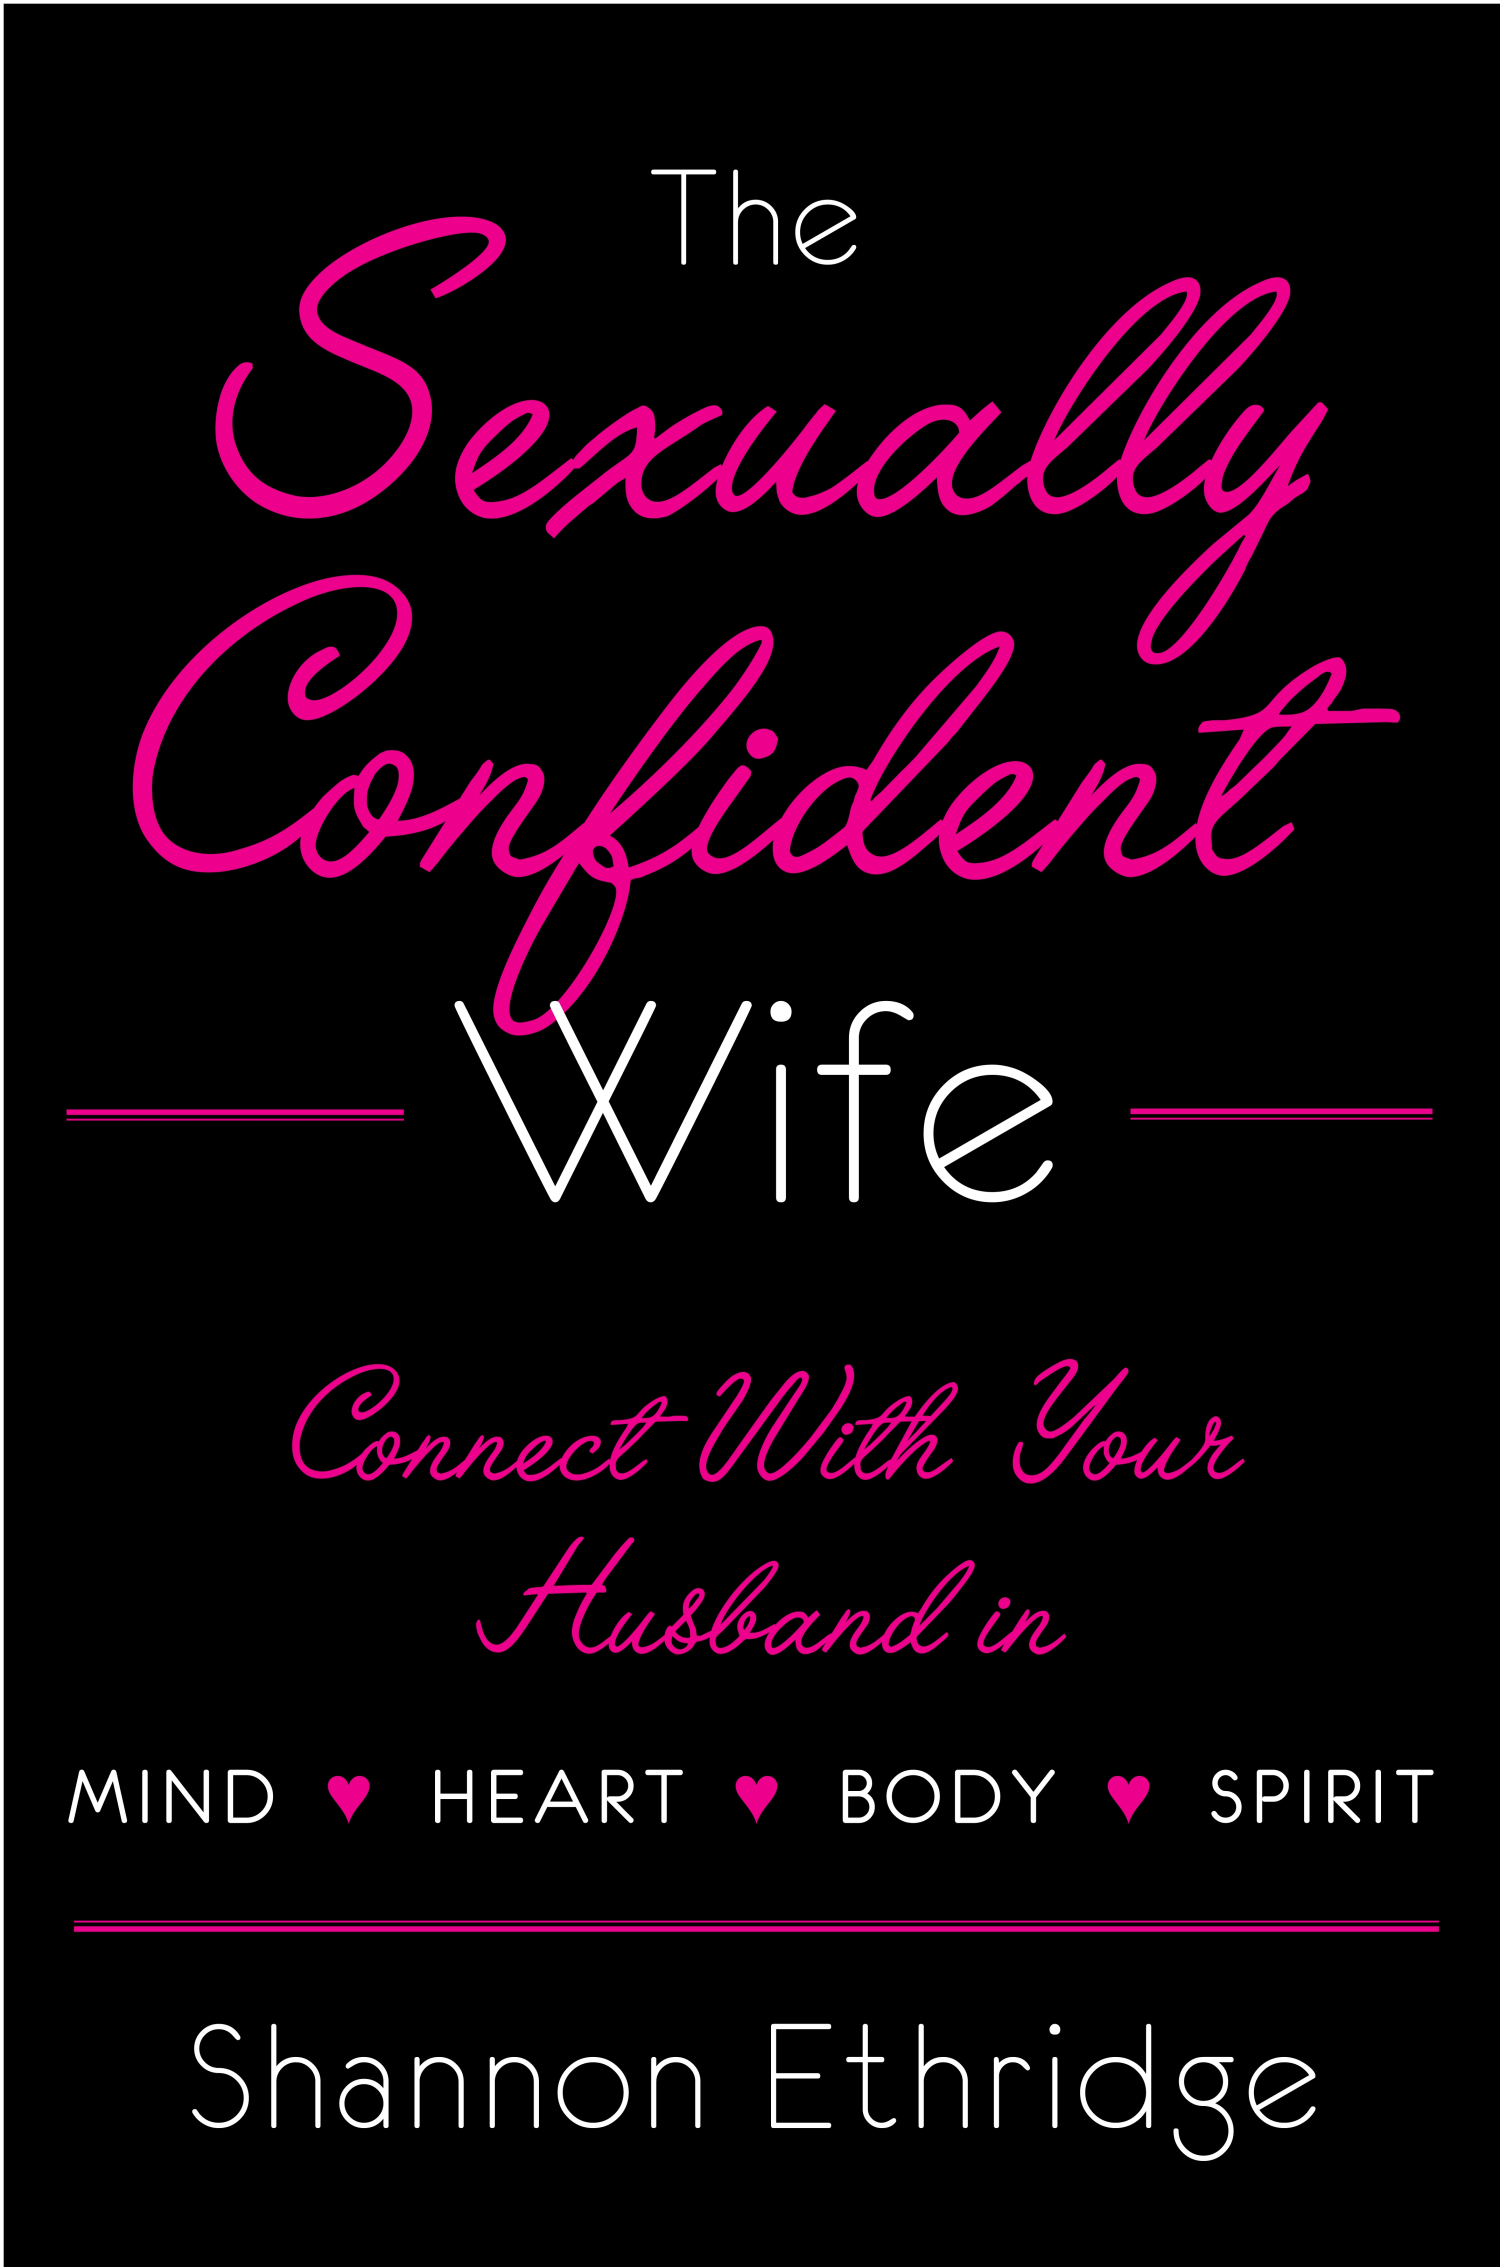 How to restore your sexual confidence